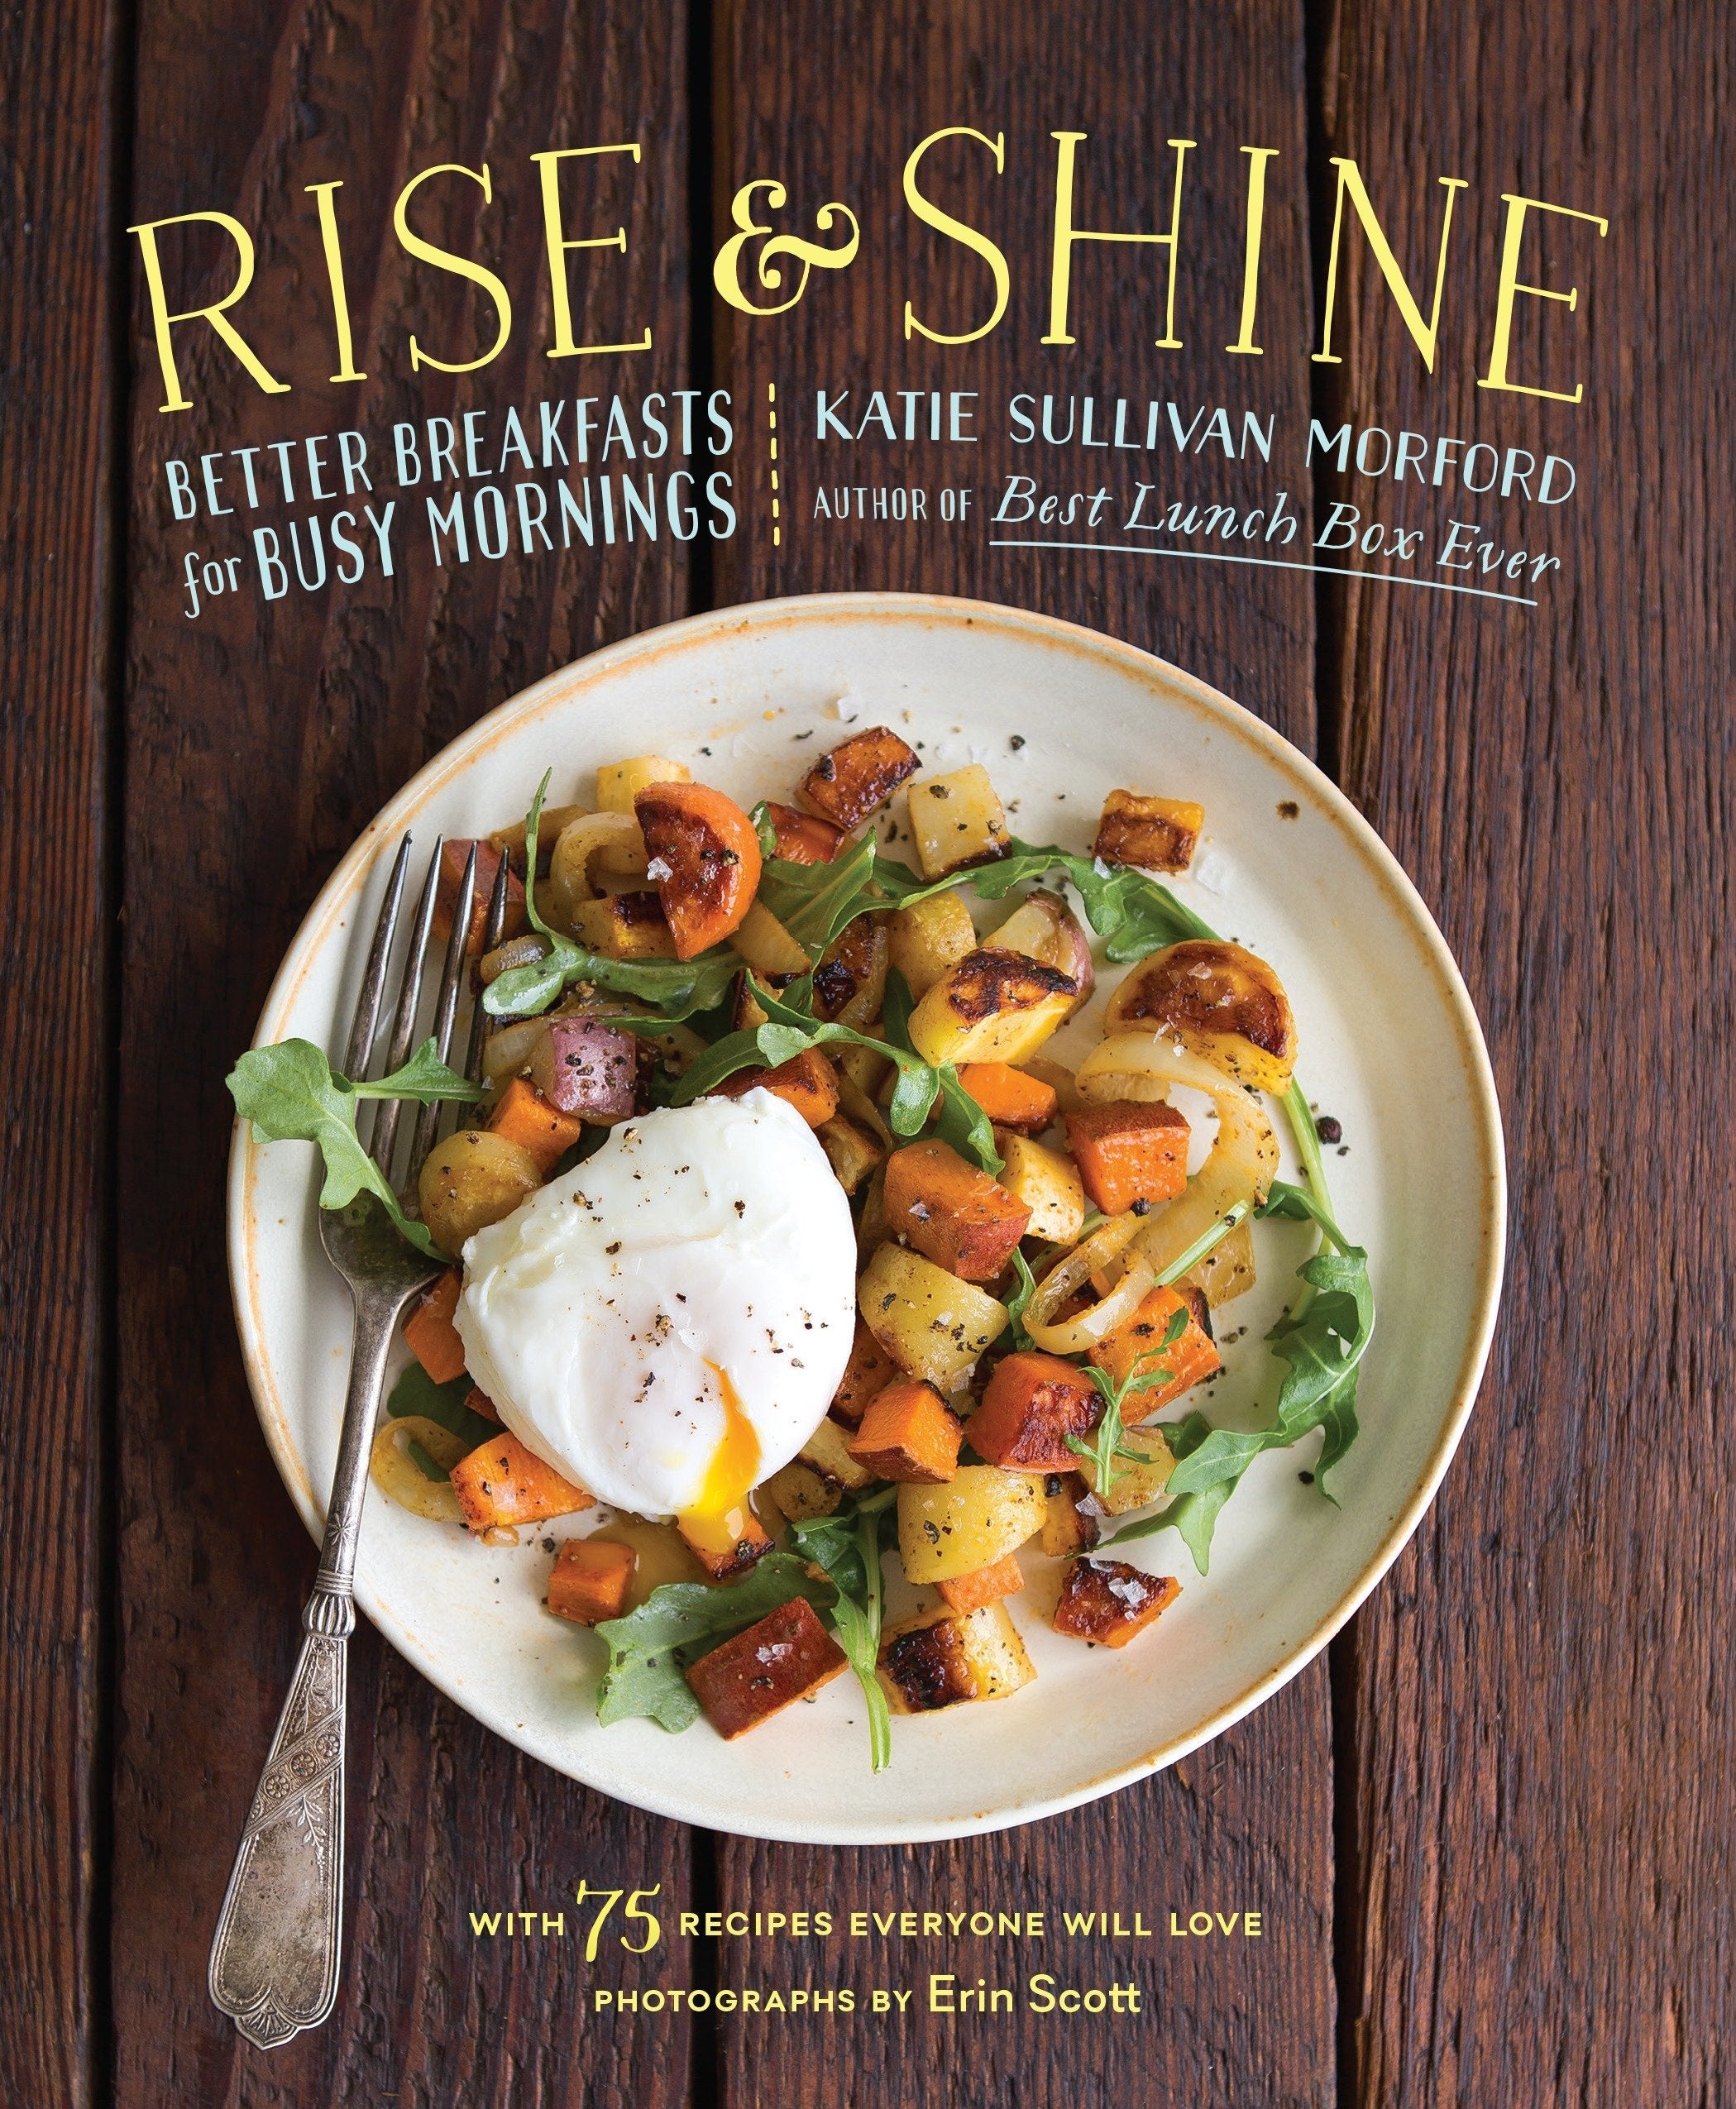 Rise and Shine: Better Breakfasts for Busy Mornings (Katie Sullivan Morford)